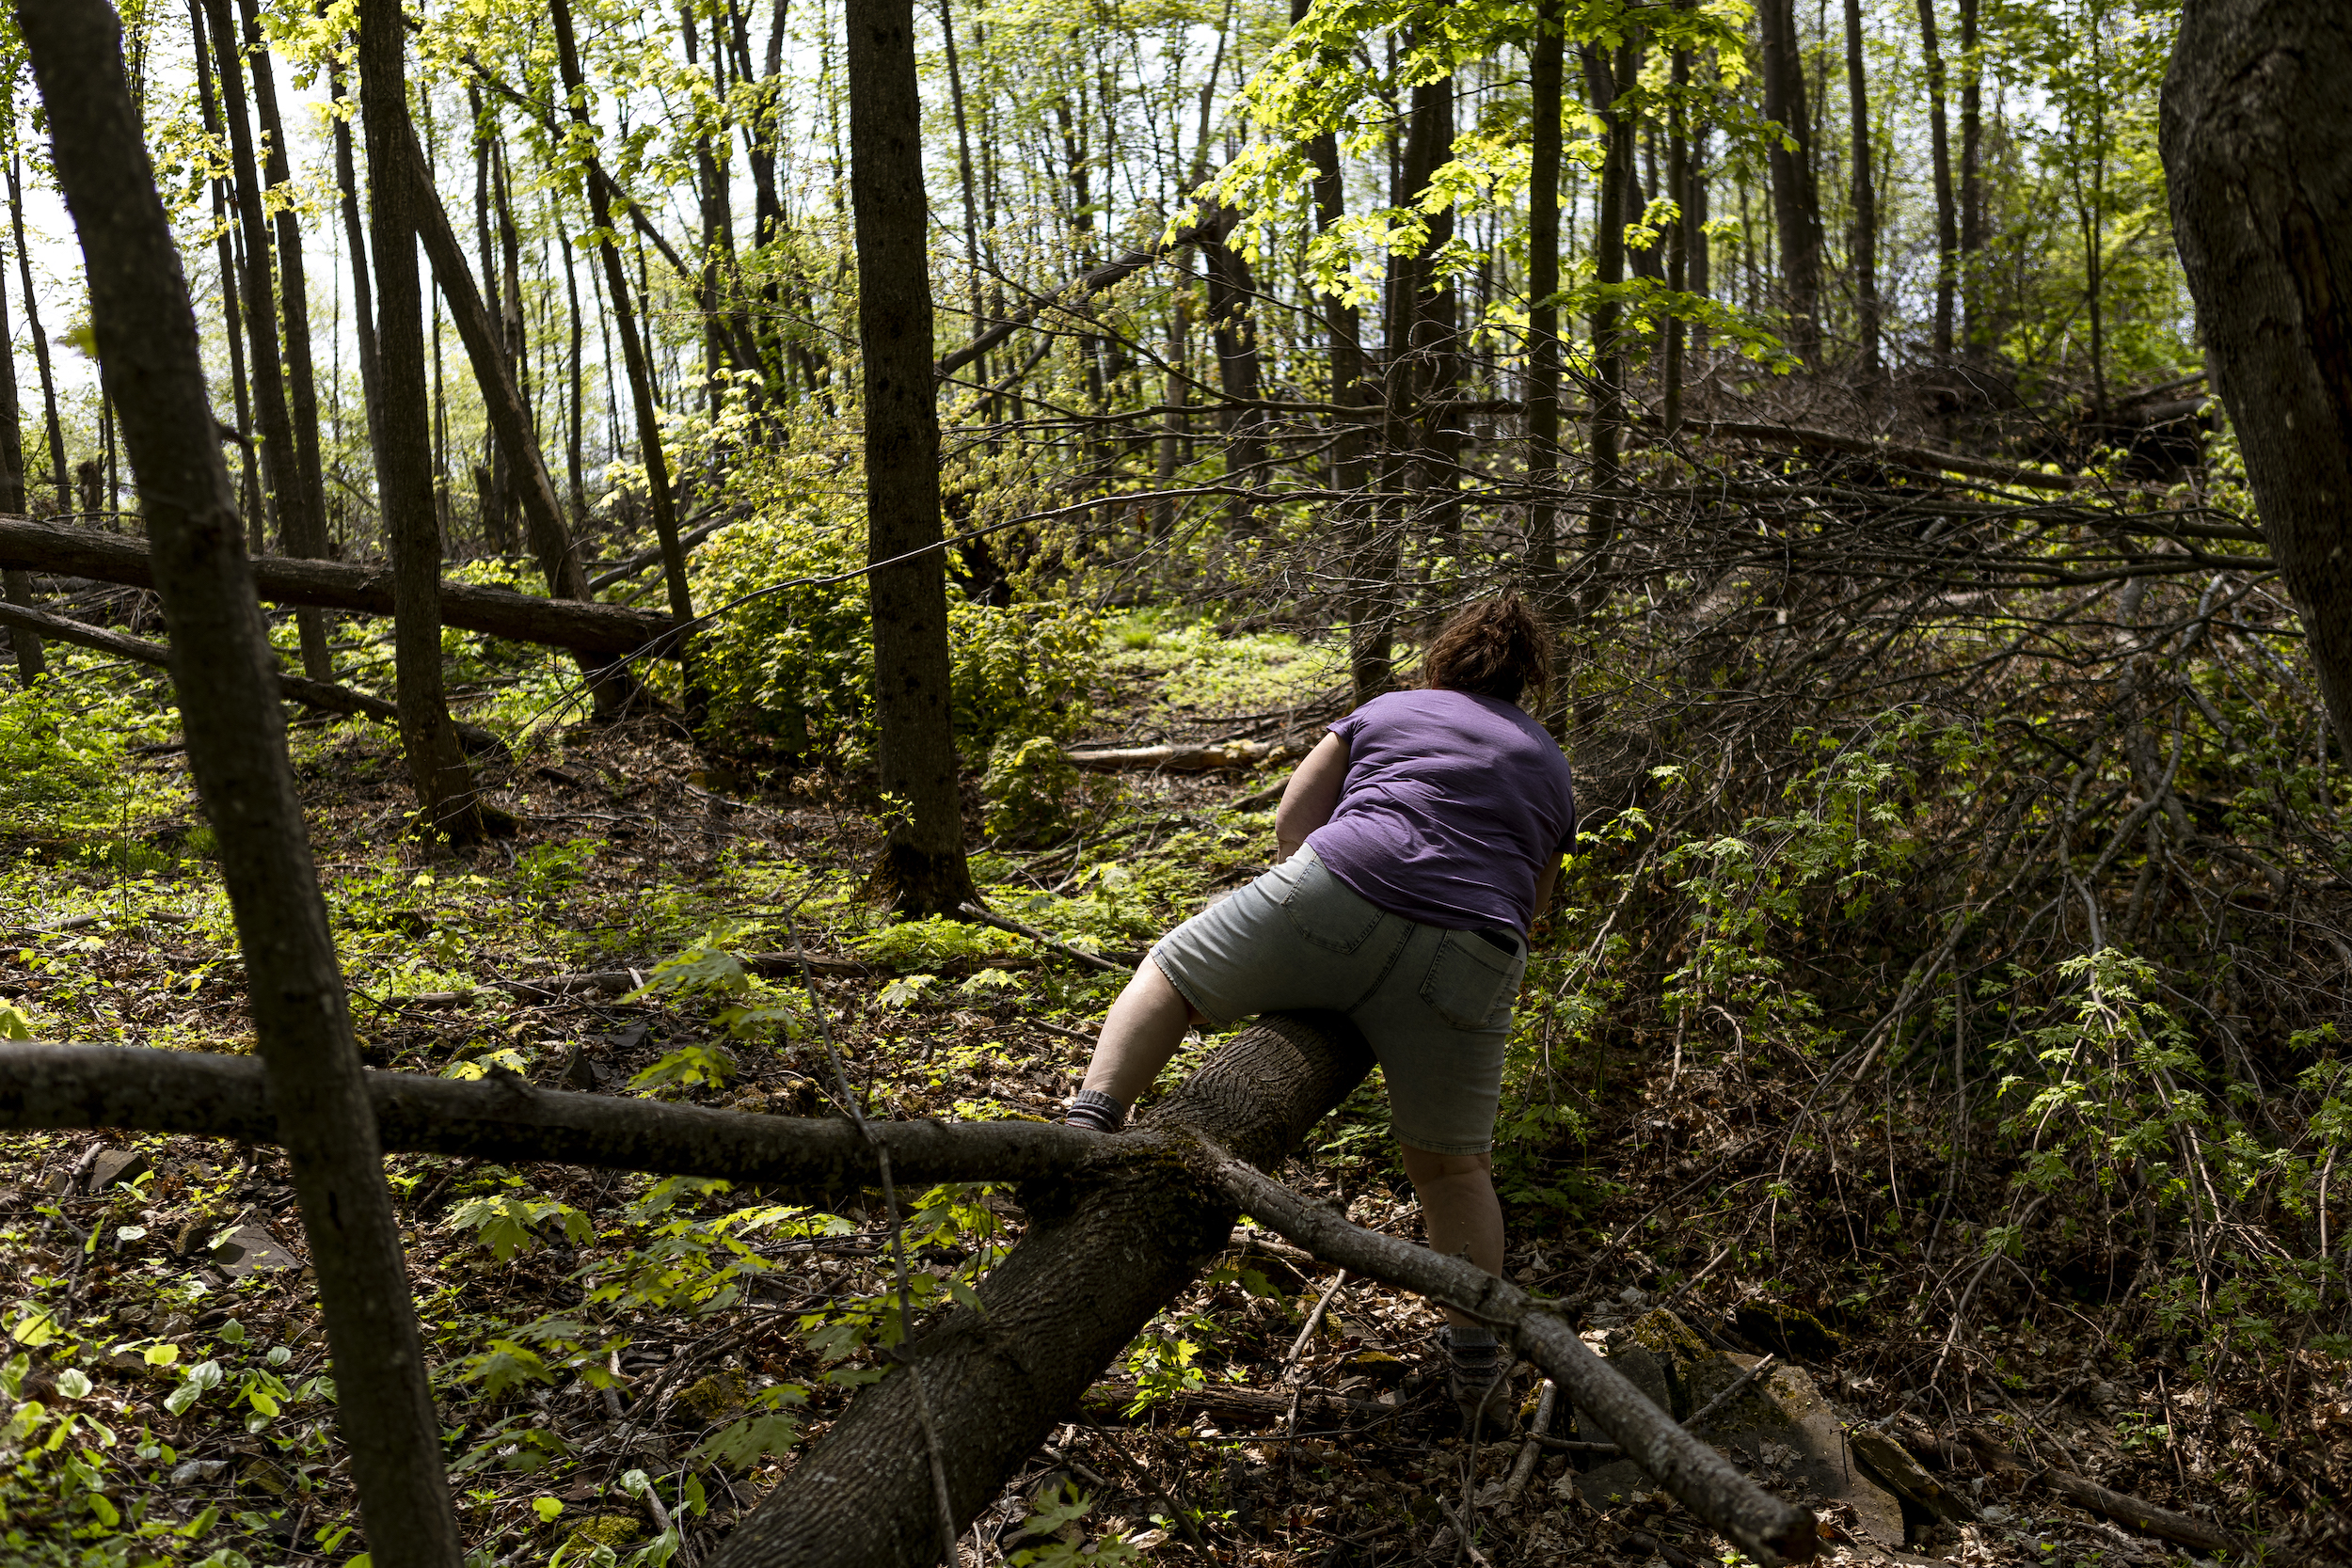 Nearly a year after the July 24 tornado, the forest on Jacqueline Muccio’s property is still littered with heaps of trunks splayed in every direction and craters from uprooted trees.